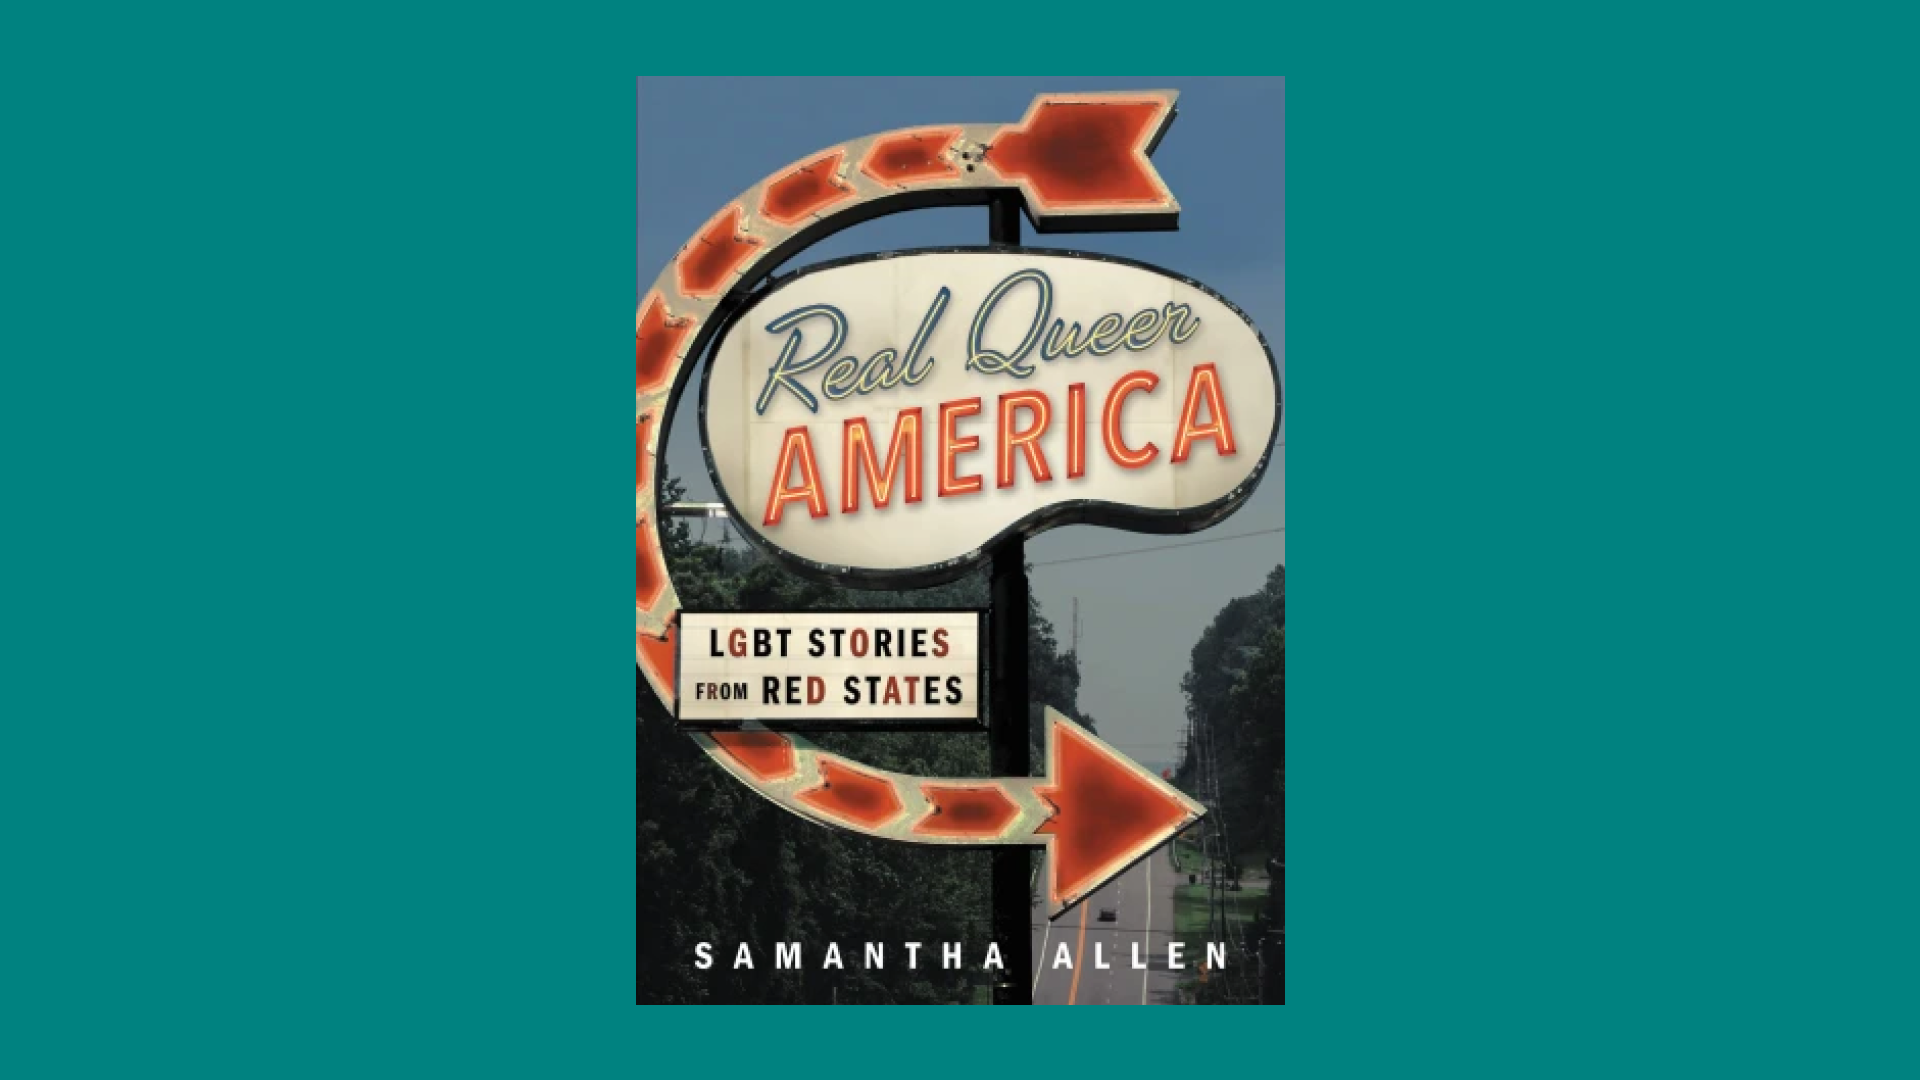 “Real Queer America” by Samantha Allen